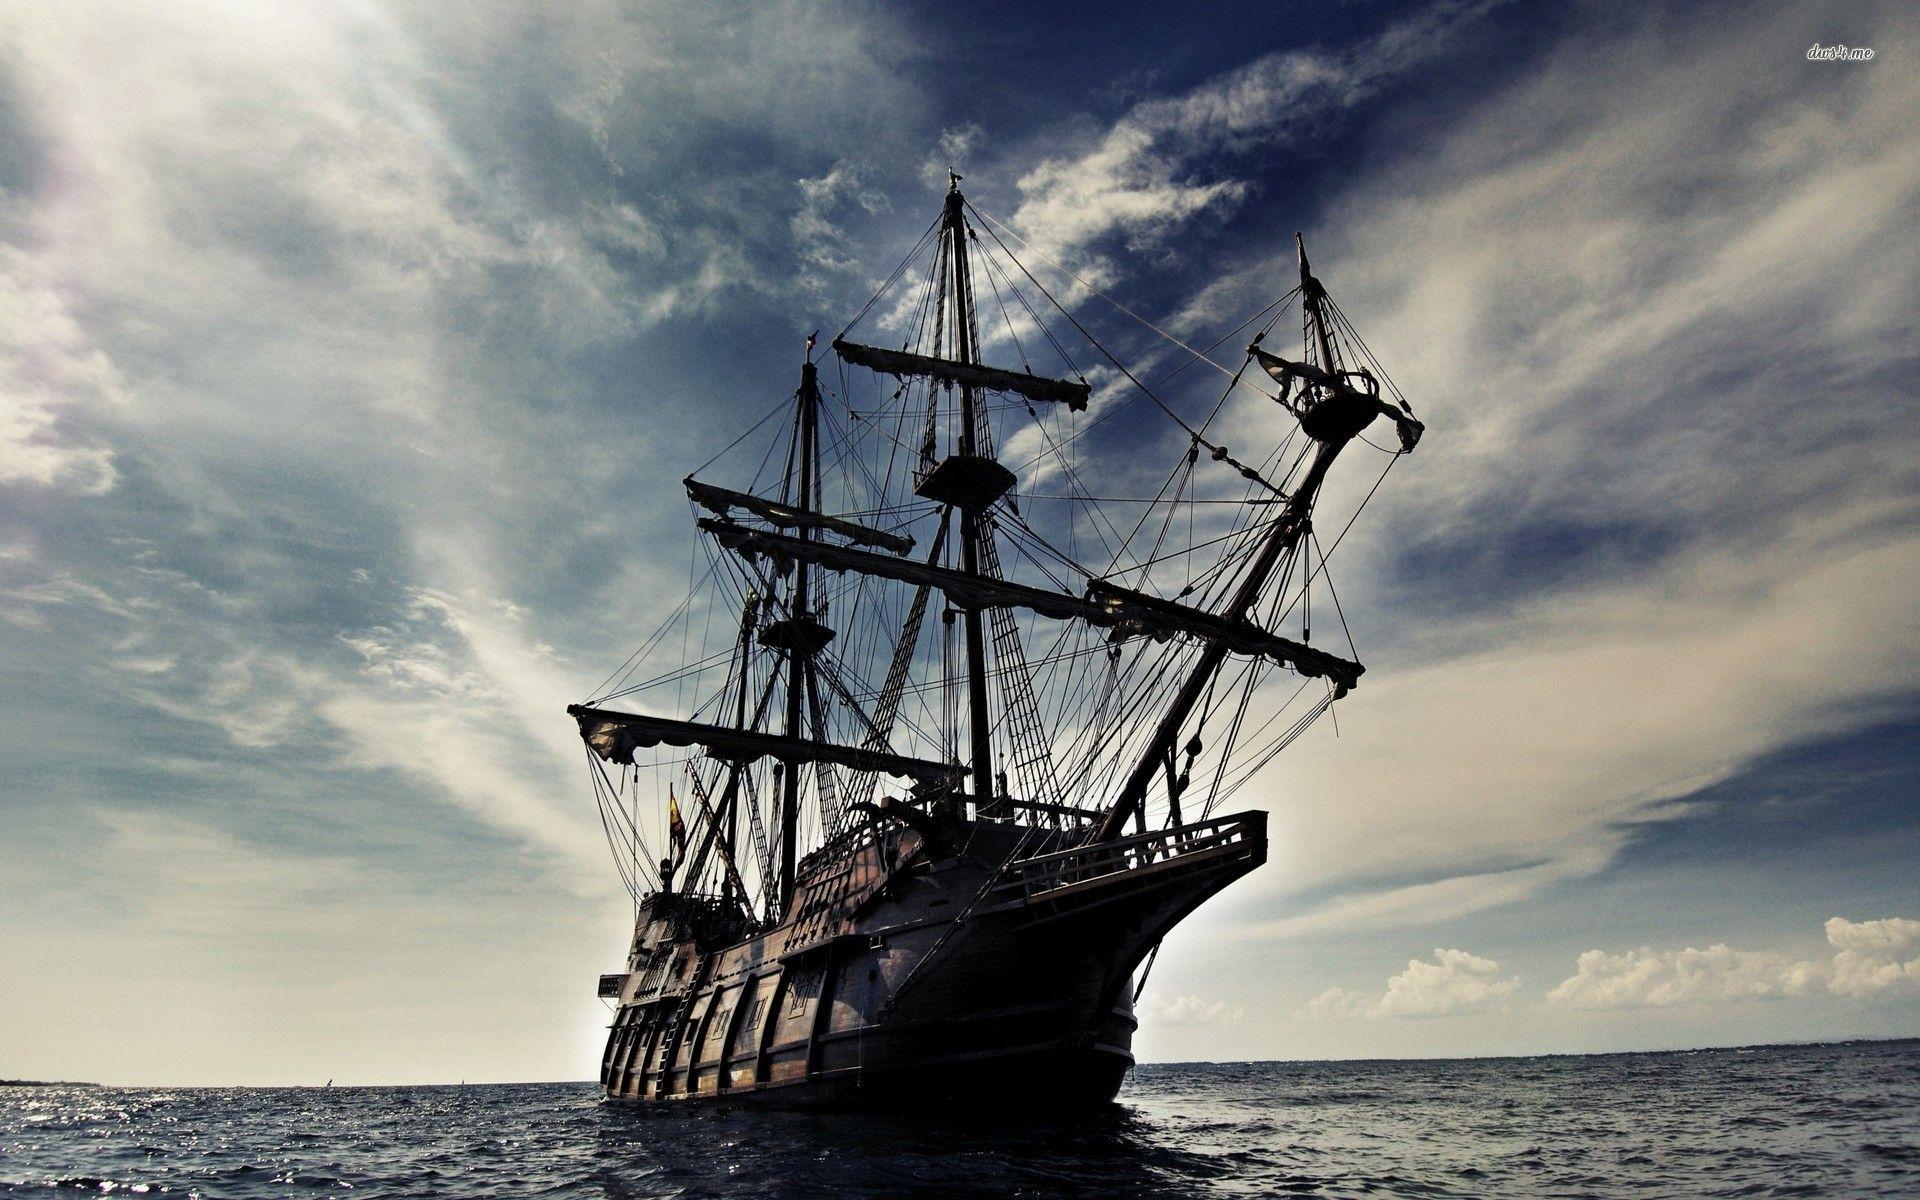 Vehicles for Gt Black Pearl Ship Wallpaper 1920x1200PX Black Pearl Wallpaper. Black pearl ship, Sailing ships, Pirates of the caribbean